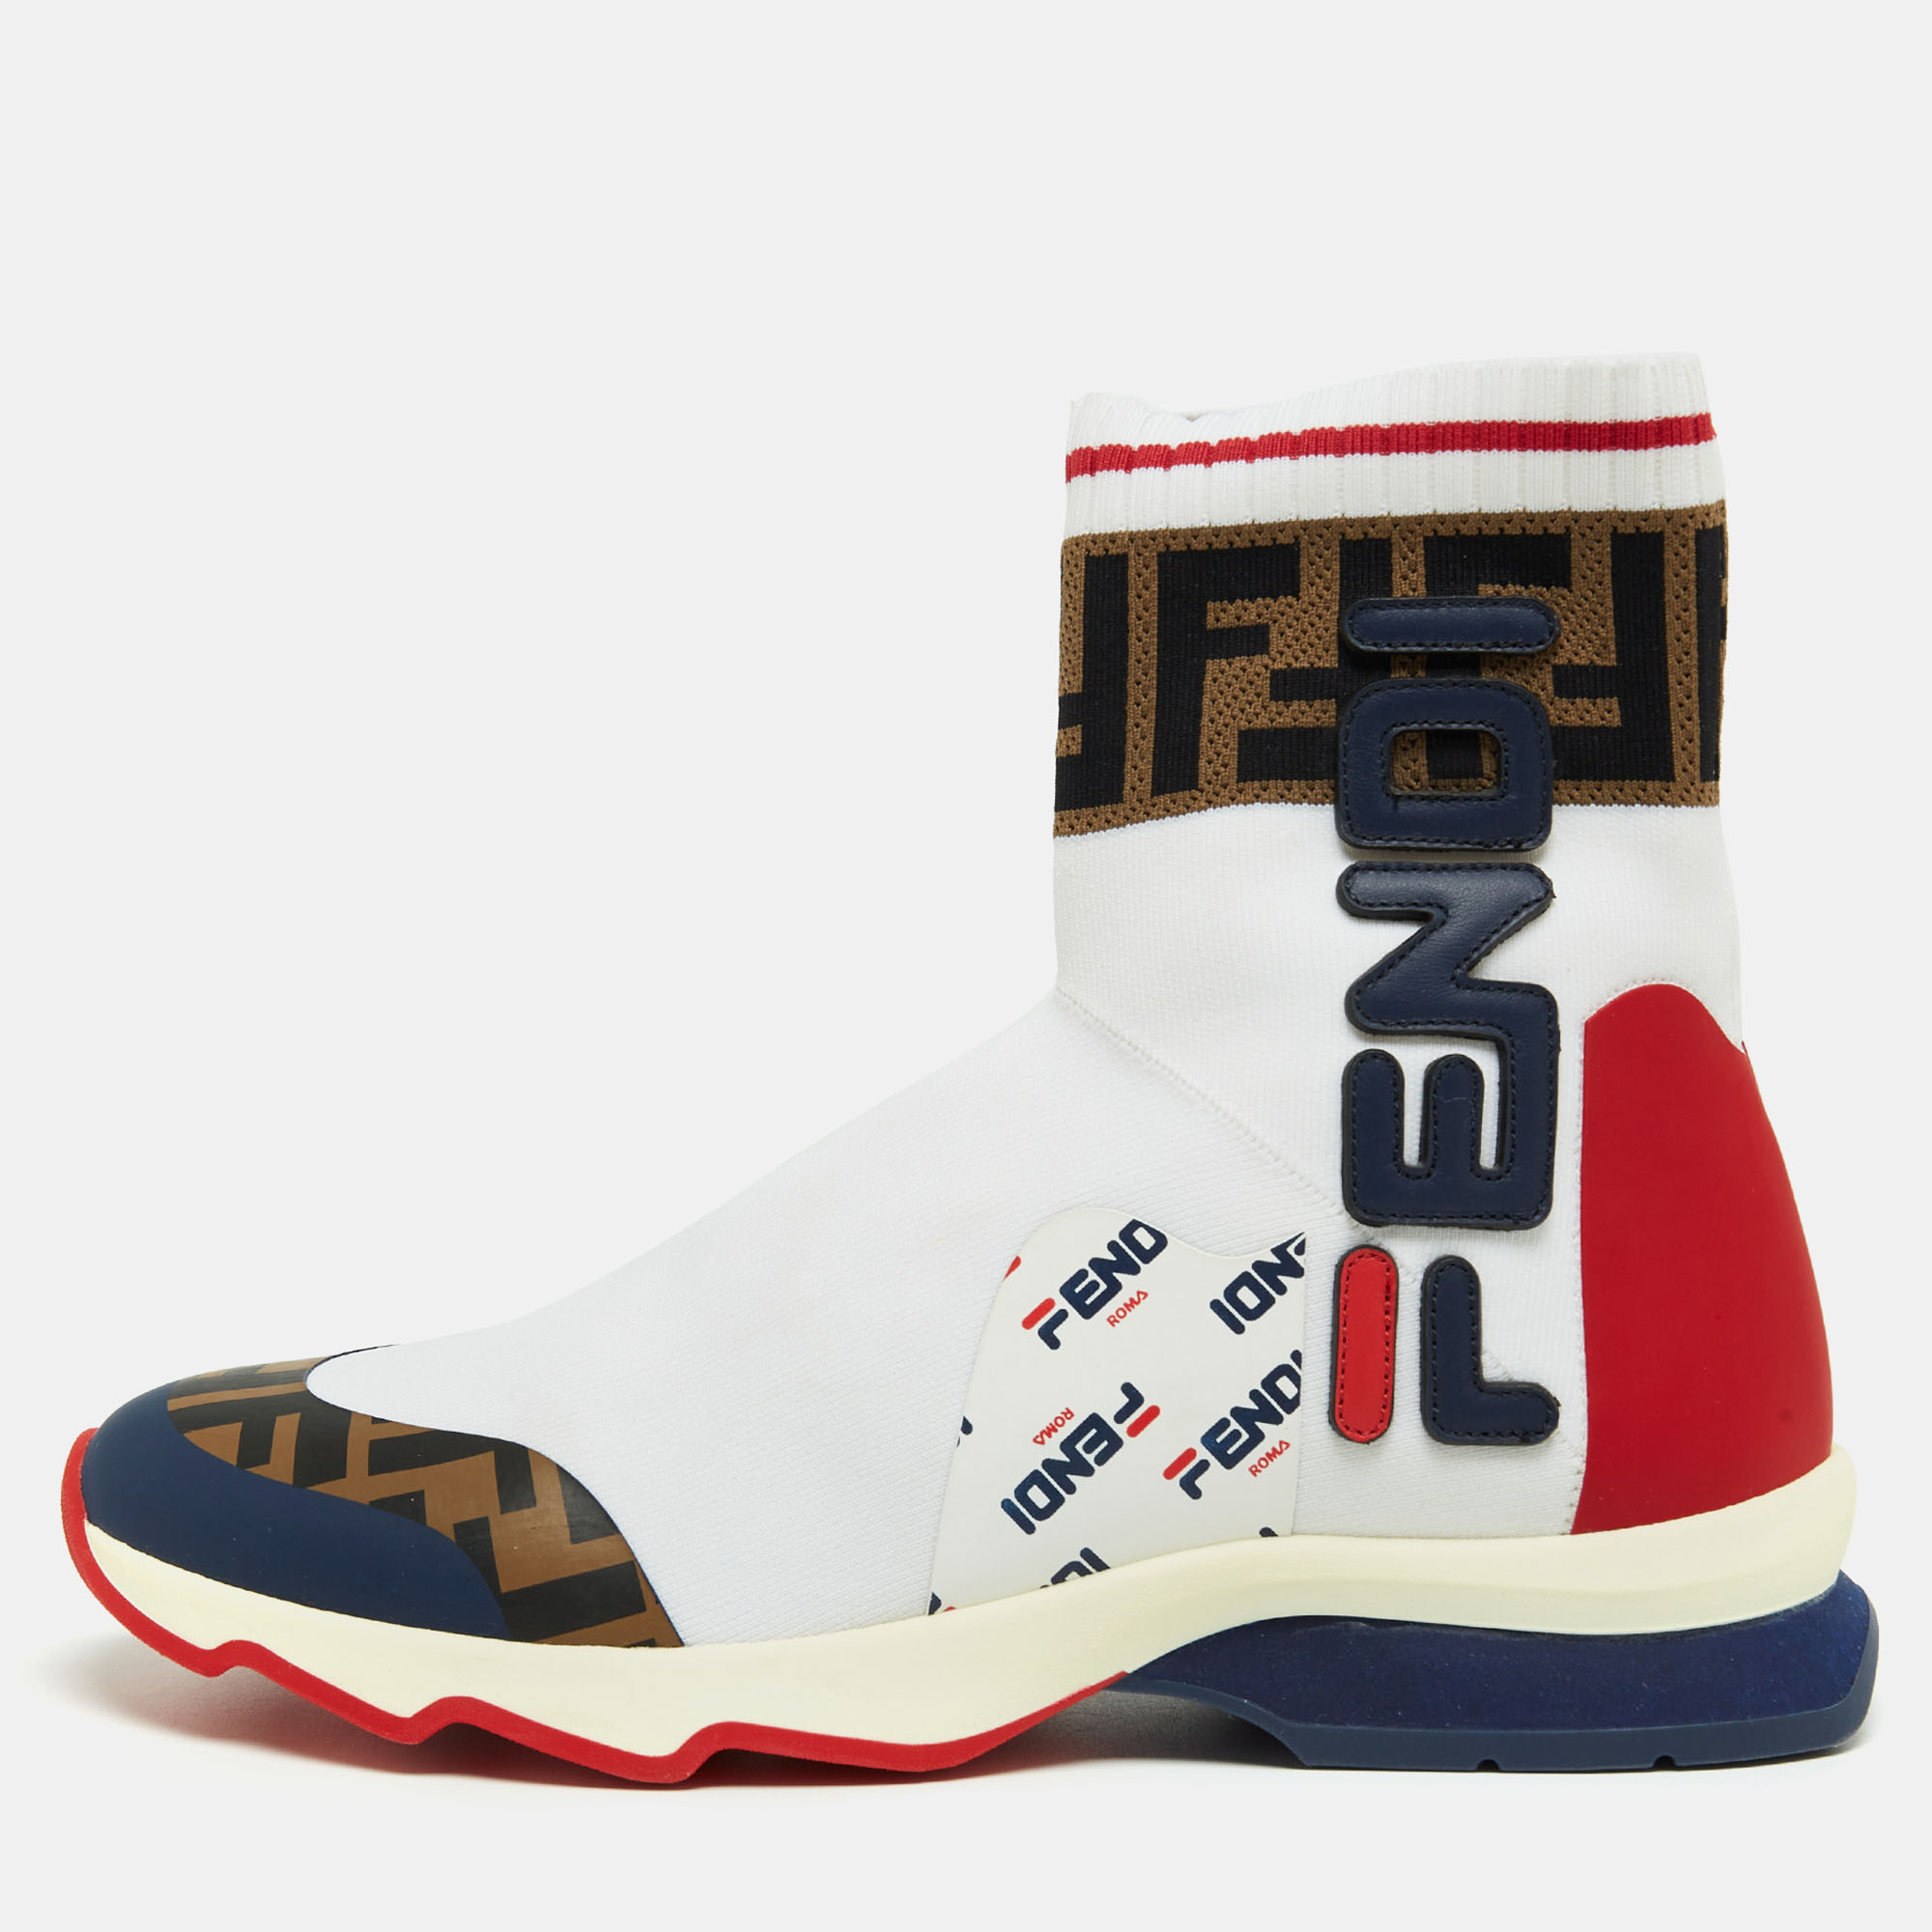 Fendi X Fila Tricolor Knit Fabric And Leather Mania Sock Sneakers Size 38